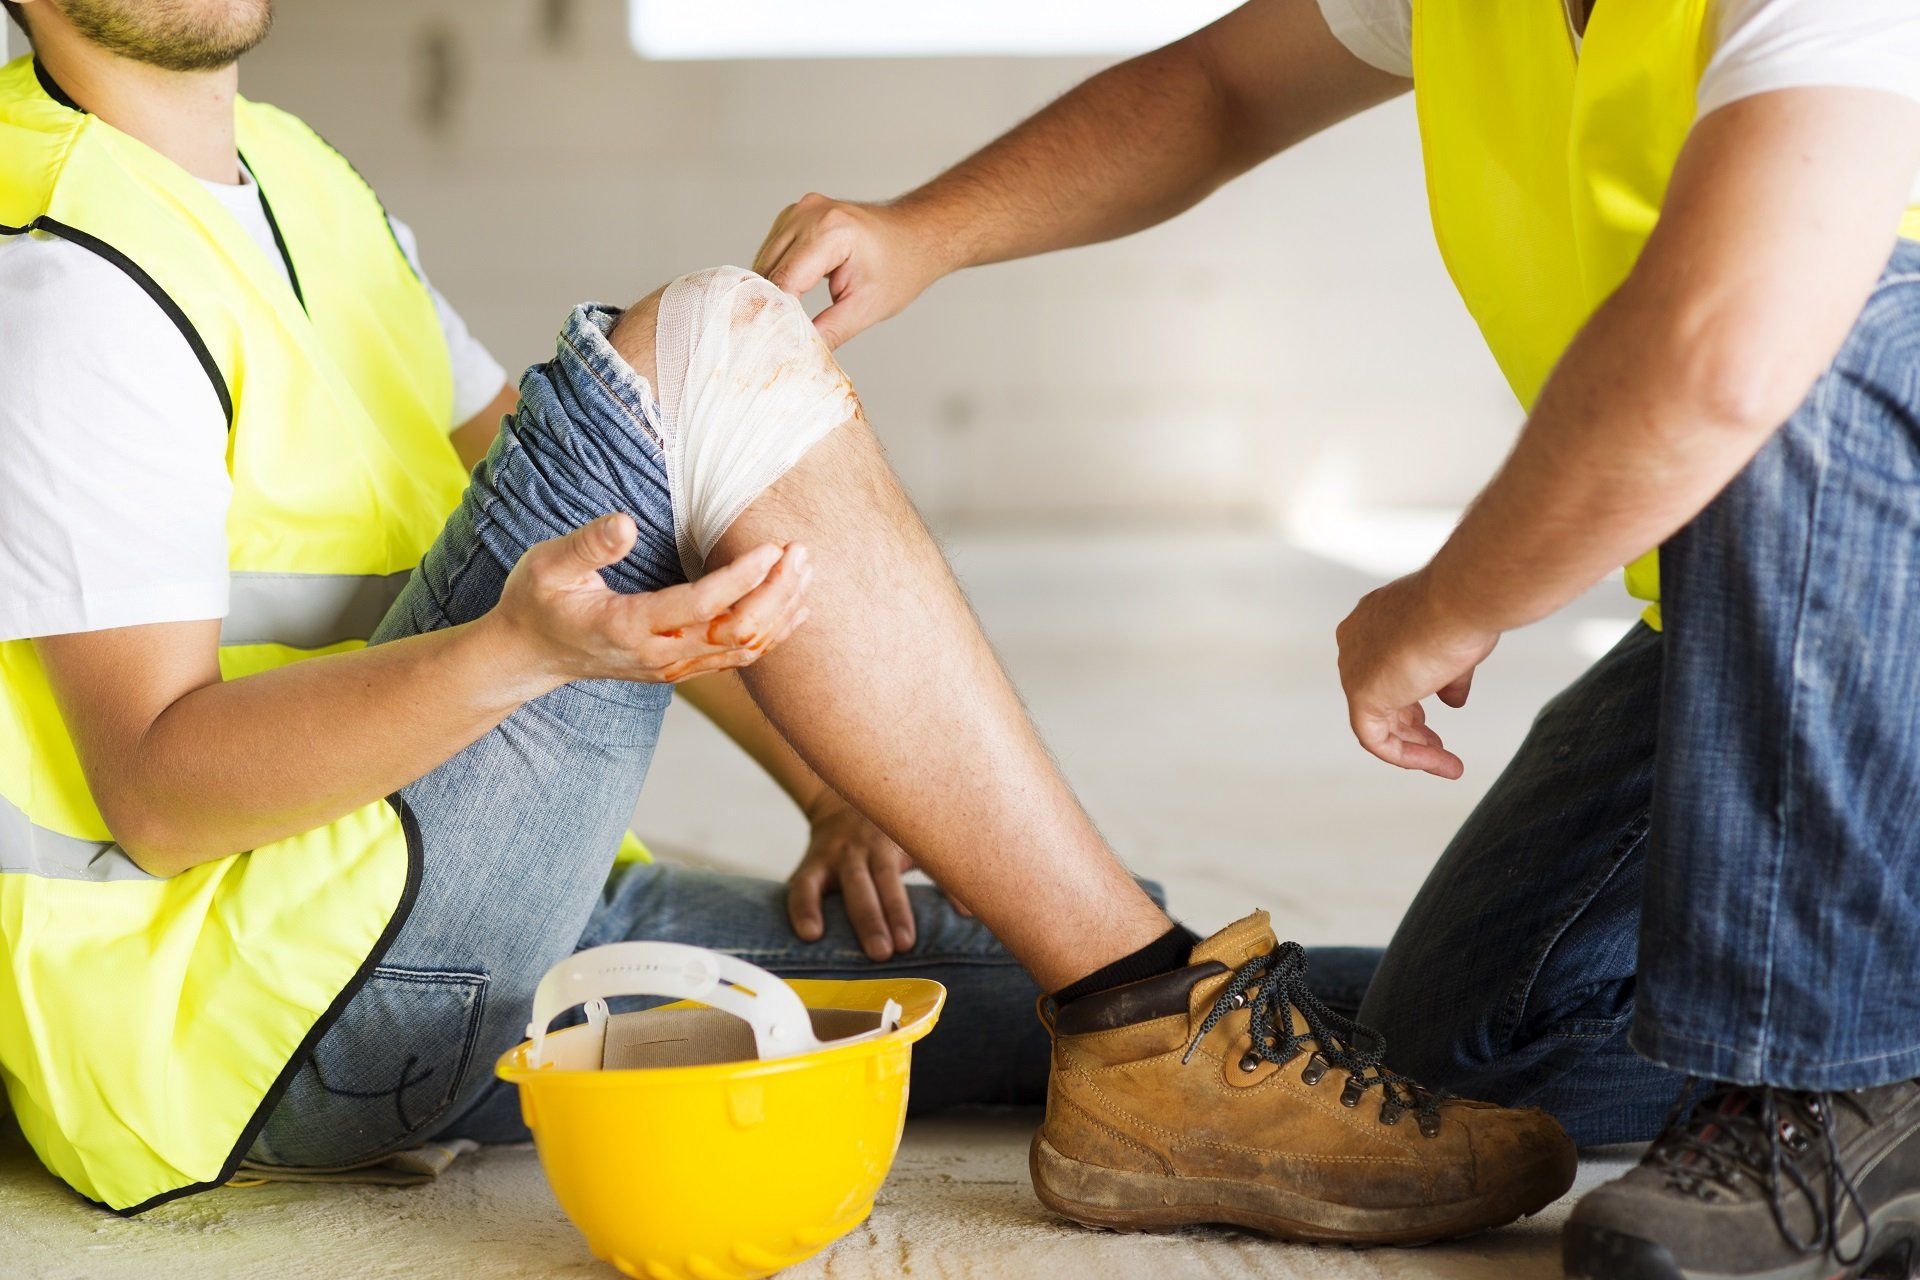 Workers' compensation act